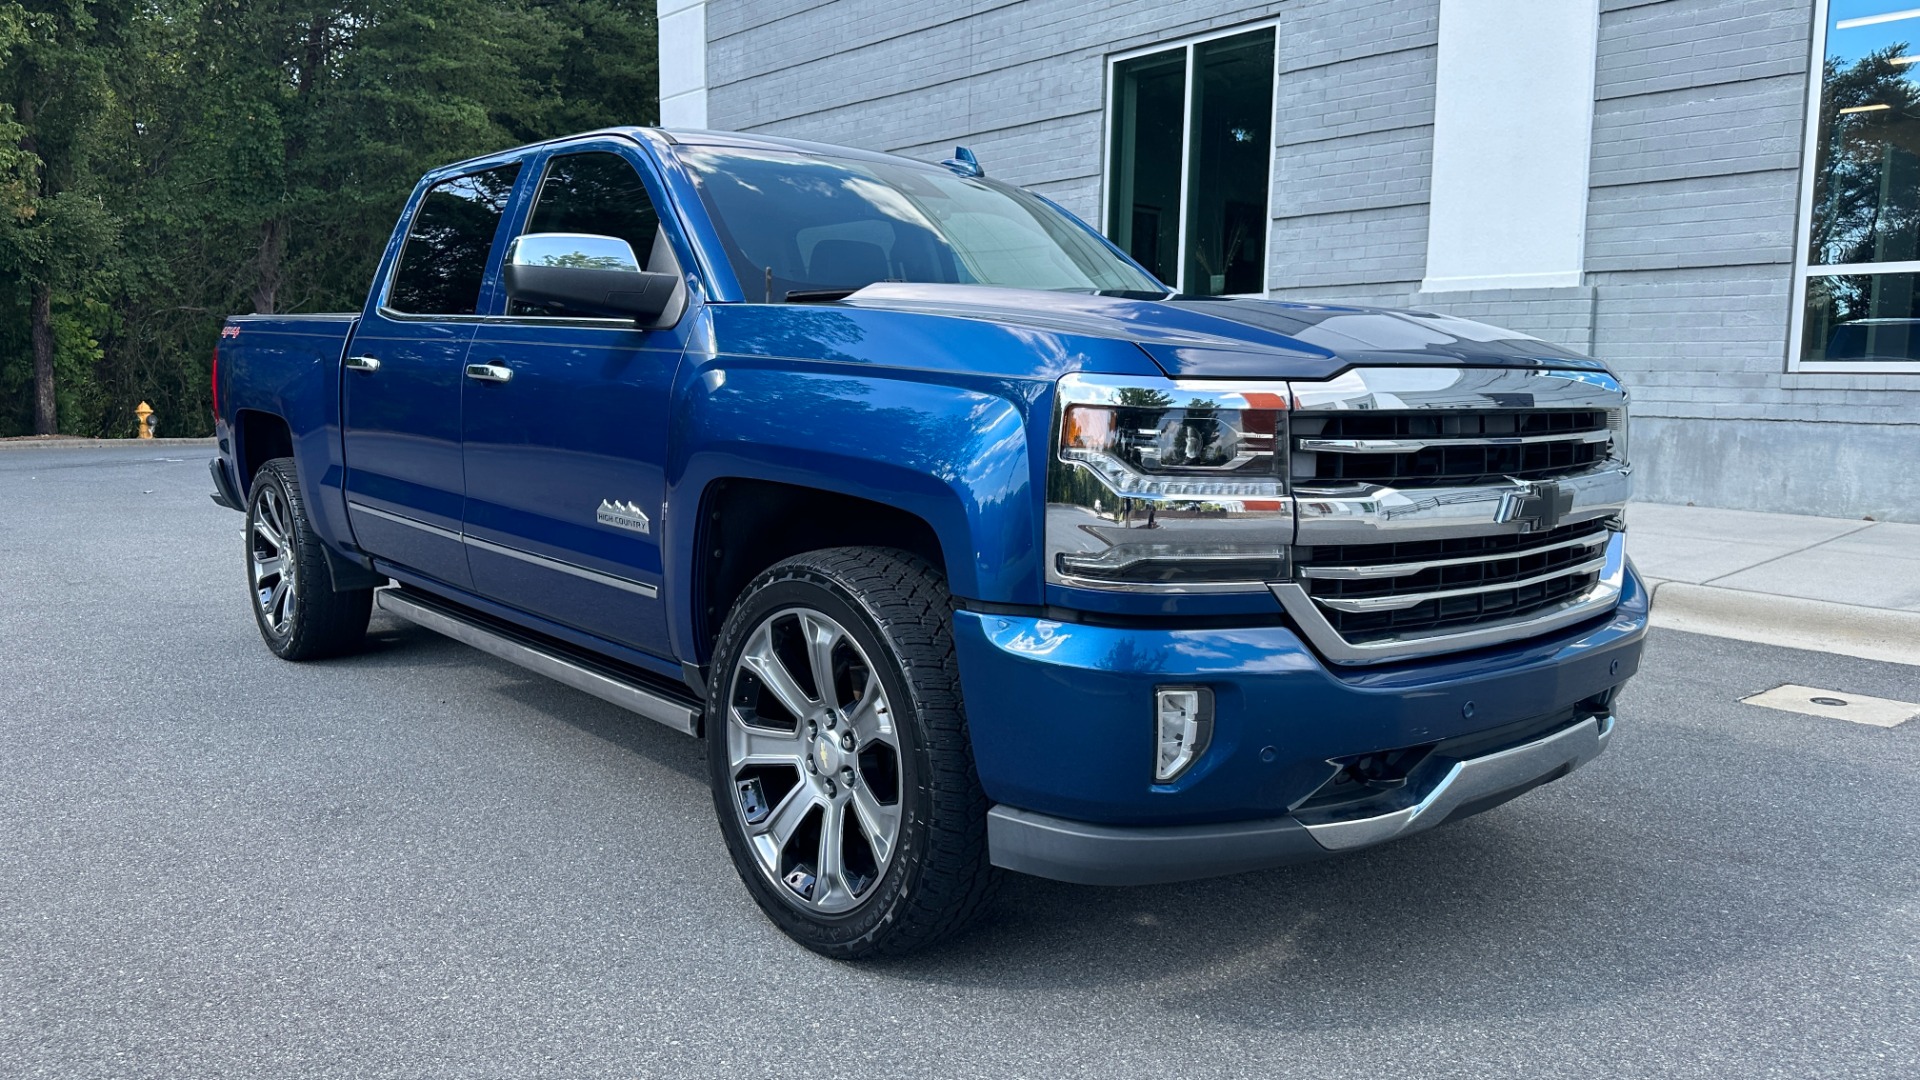 Used 2017 Chevrolet Silverado 1500 High Country 6.2L / 22IN WHEELS / SUNROOF / POWER RUNNING BOARDS for sale Sold at Formula Imports in Charlotte NC 28227 5